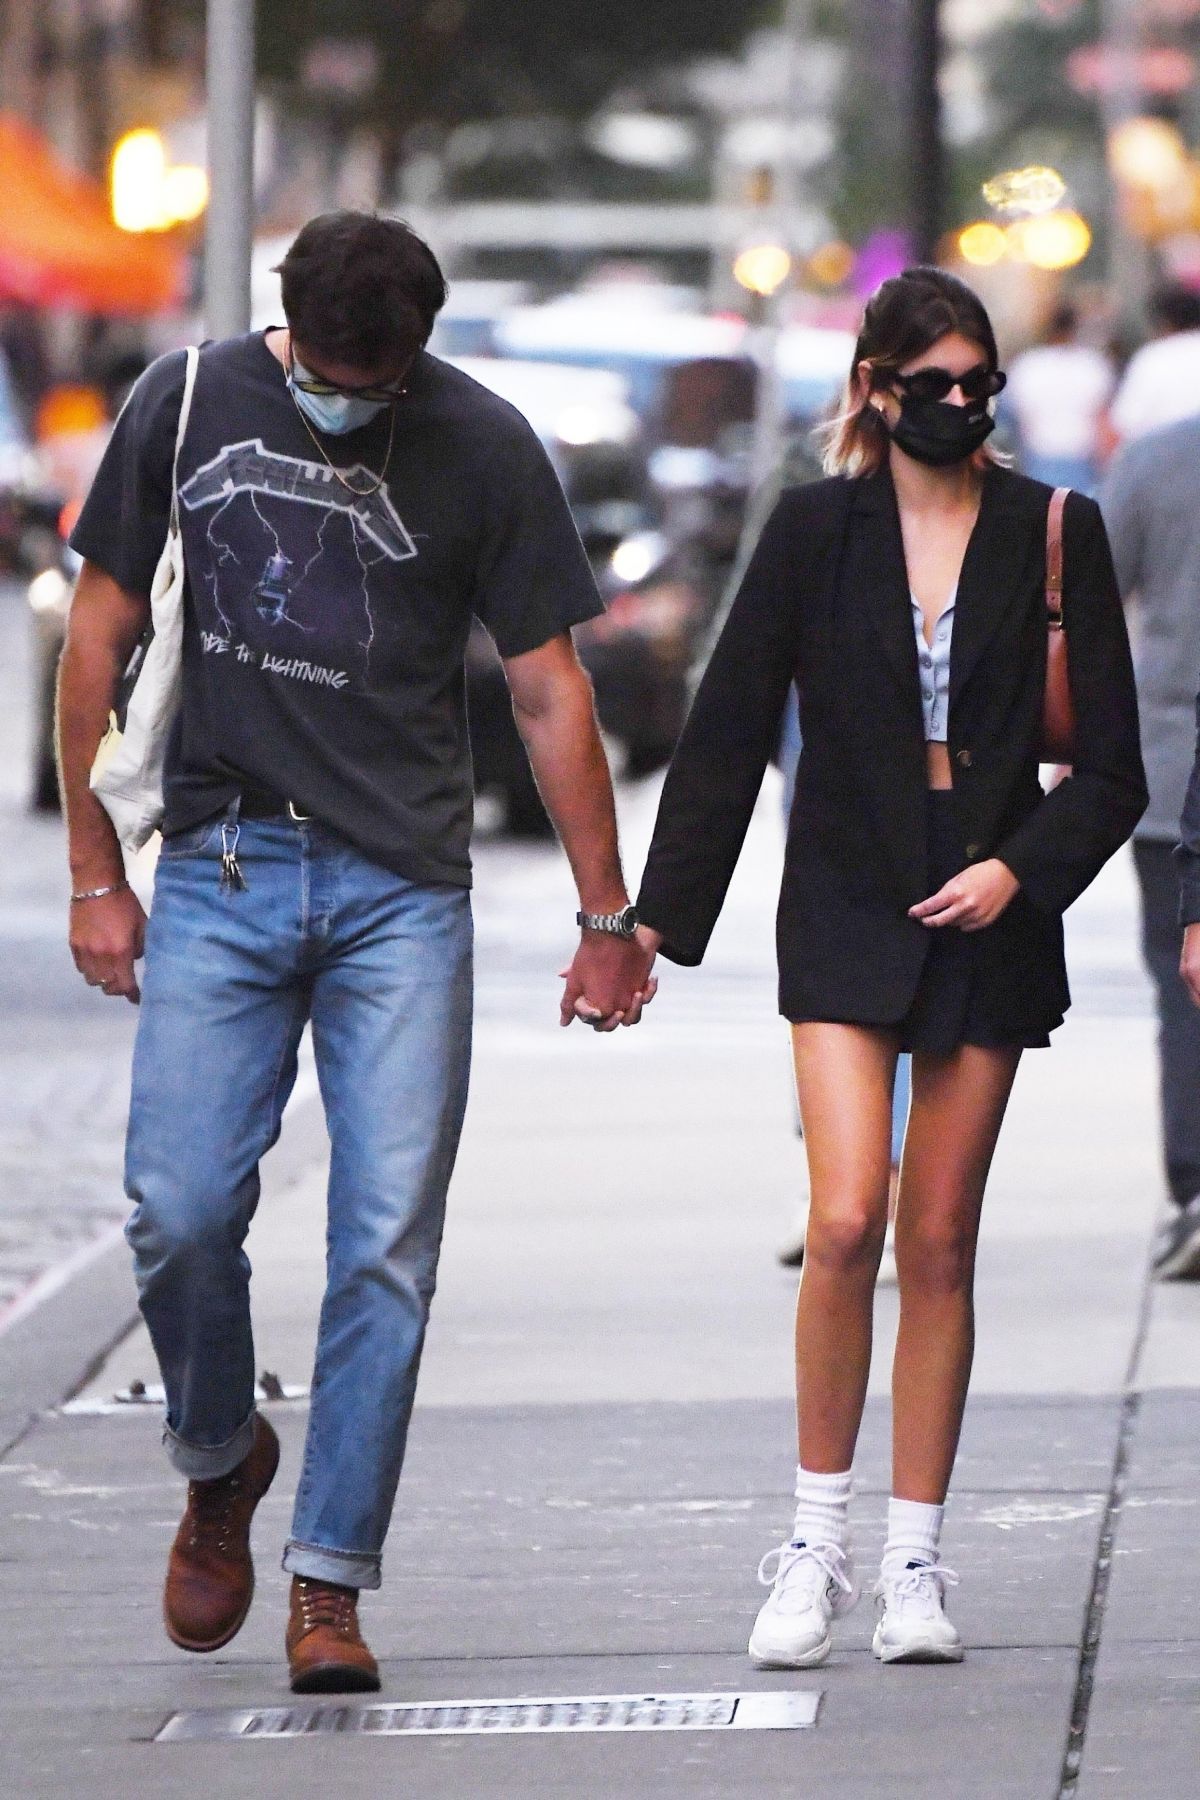 kaia-gerber-and-jacob-elordi-heading-to-their-apartment-in-new-york-09-11-2020-2.jpg